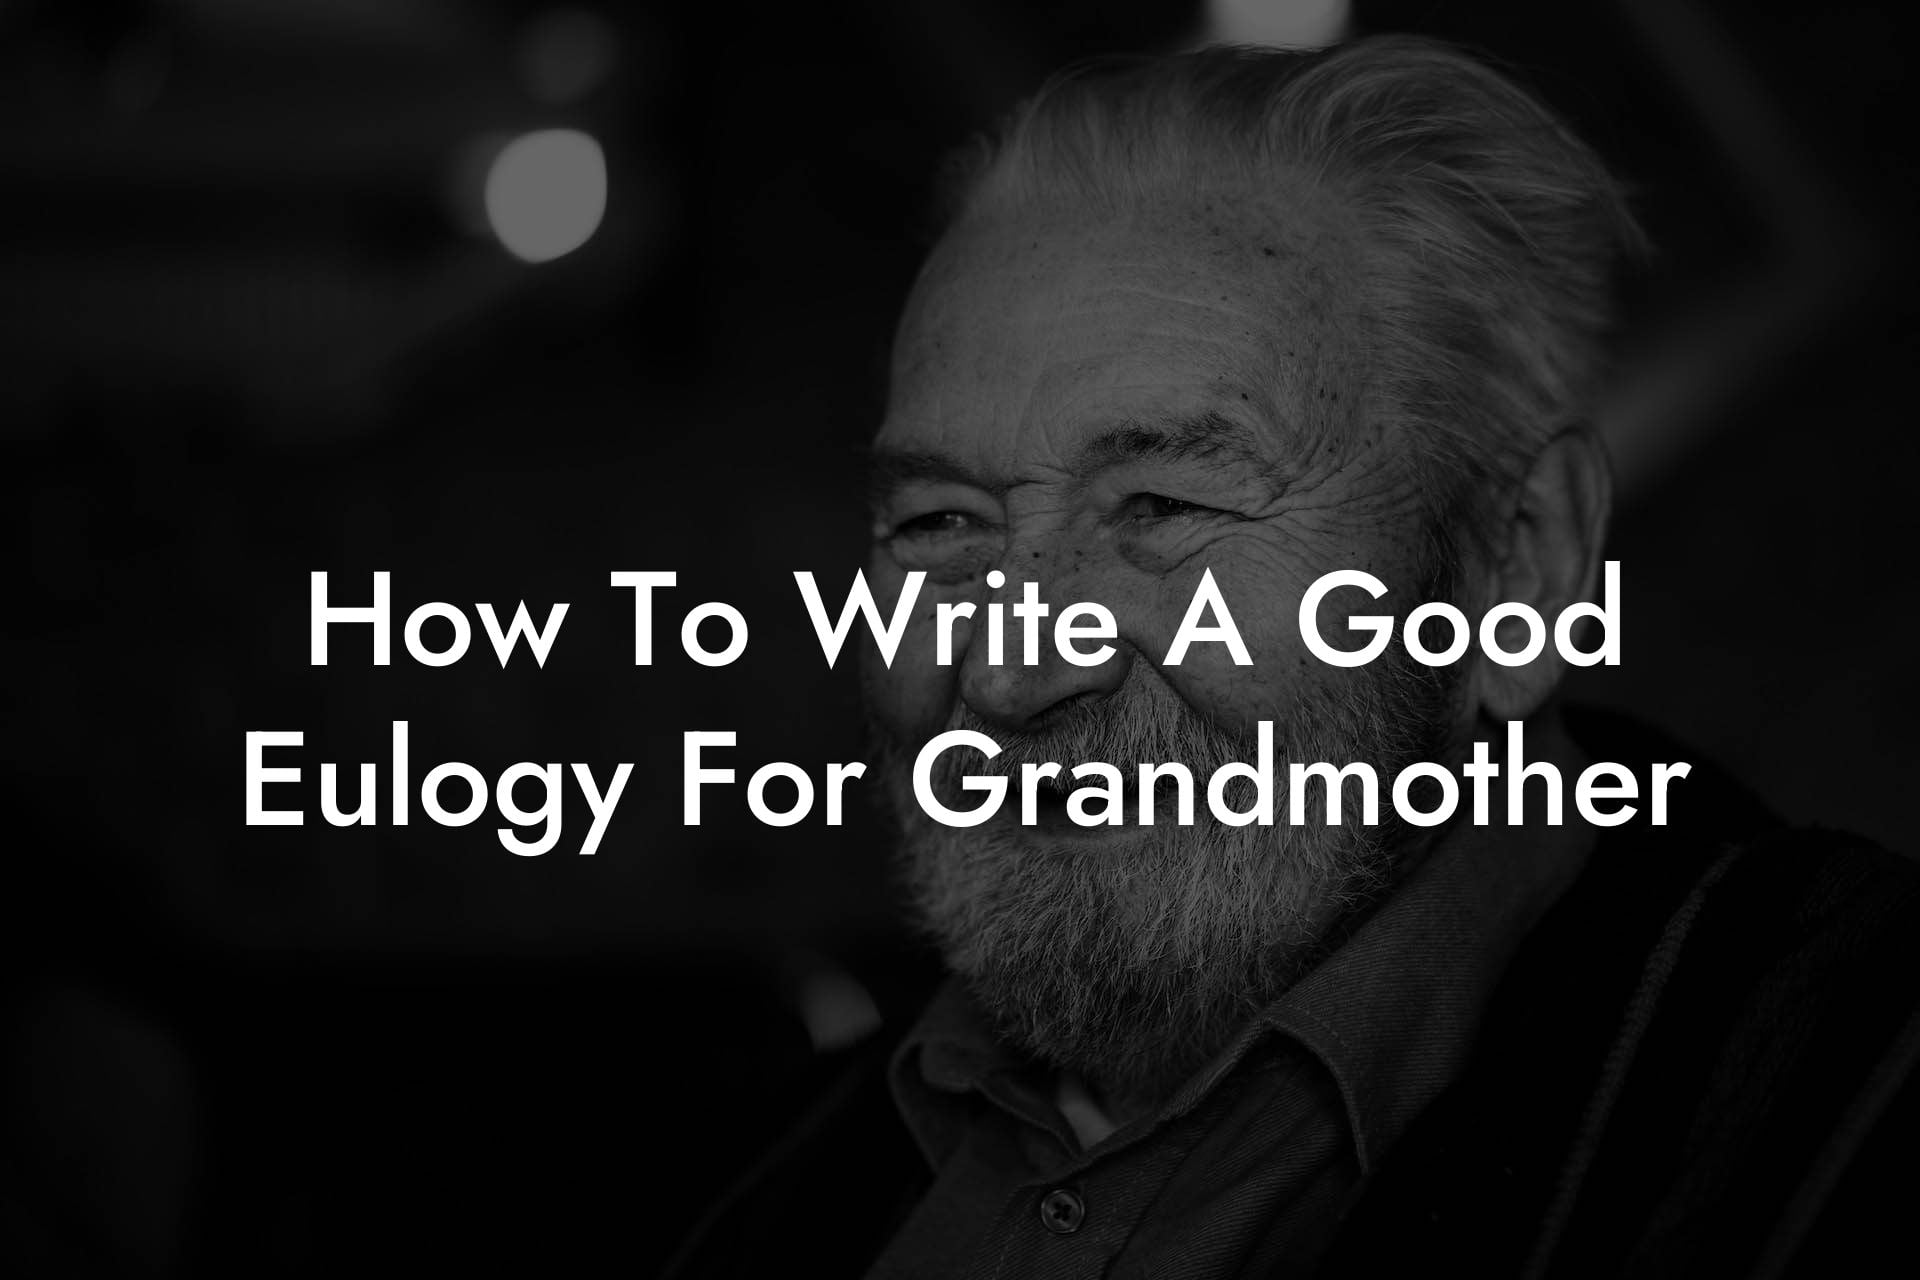 How To Write A Good Eulogy For Grandmother